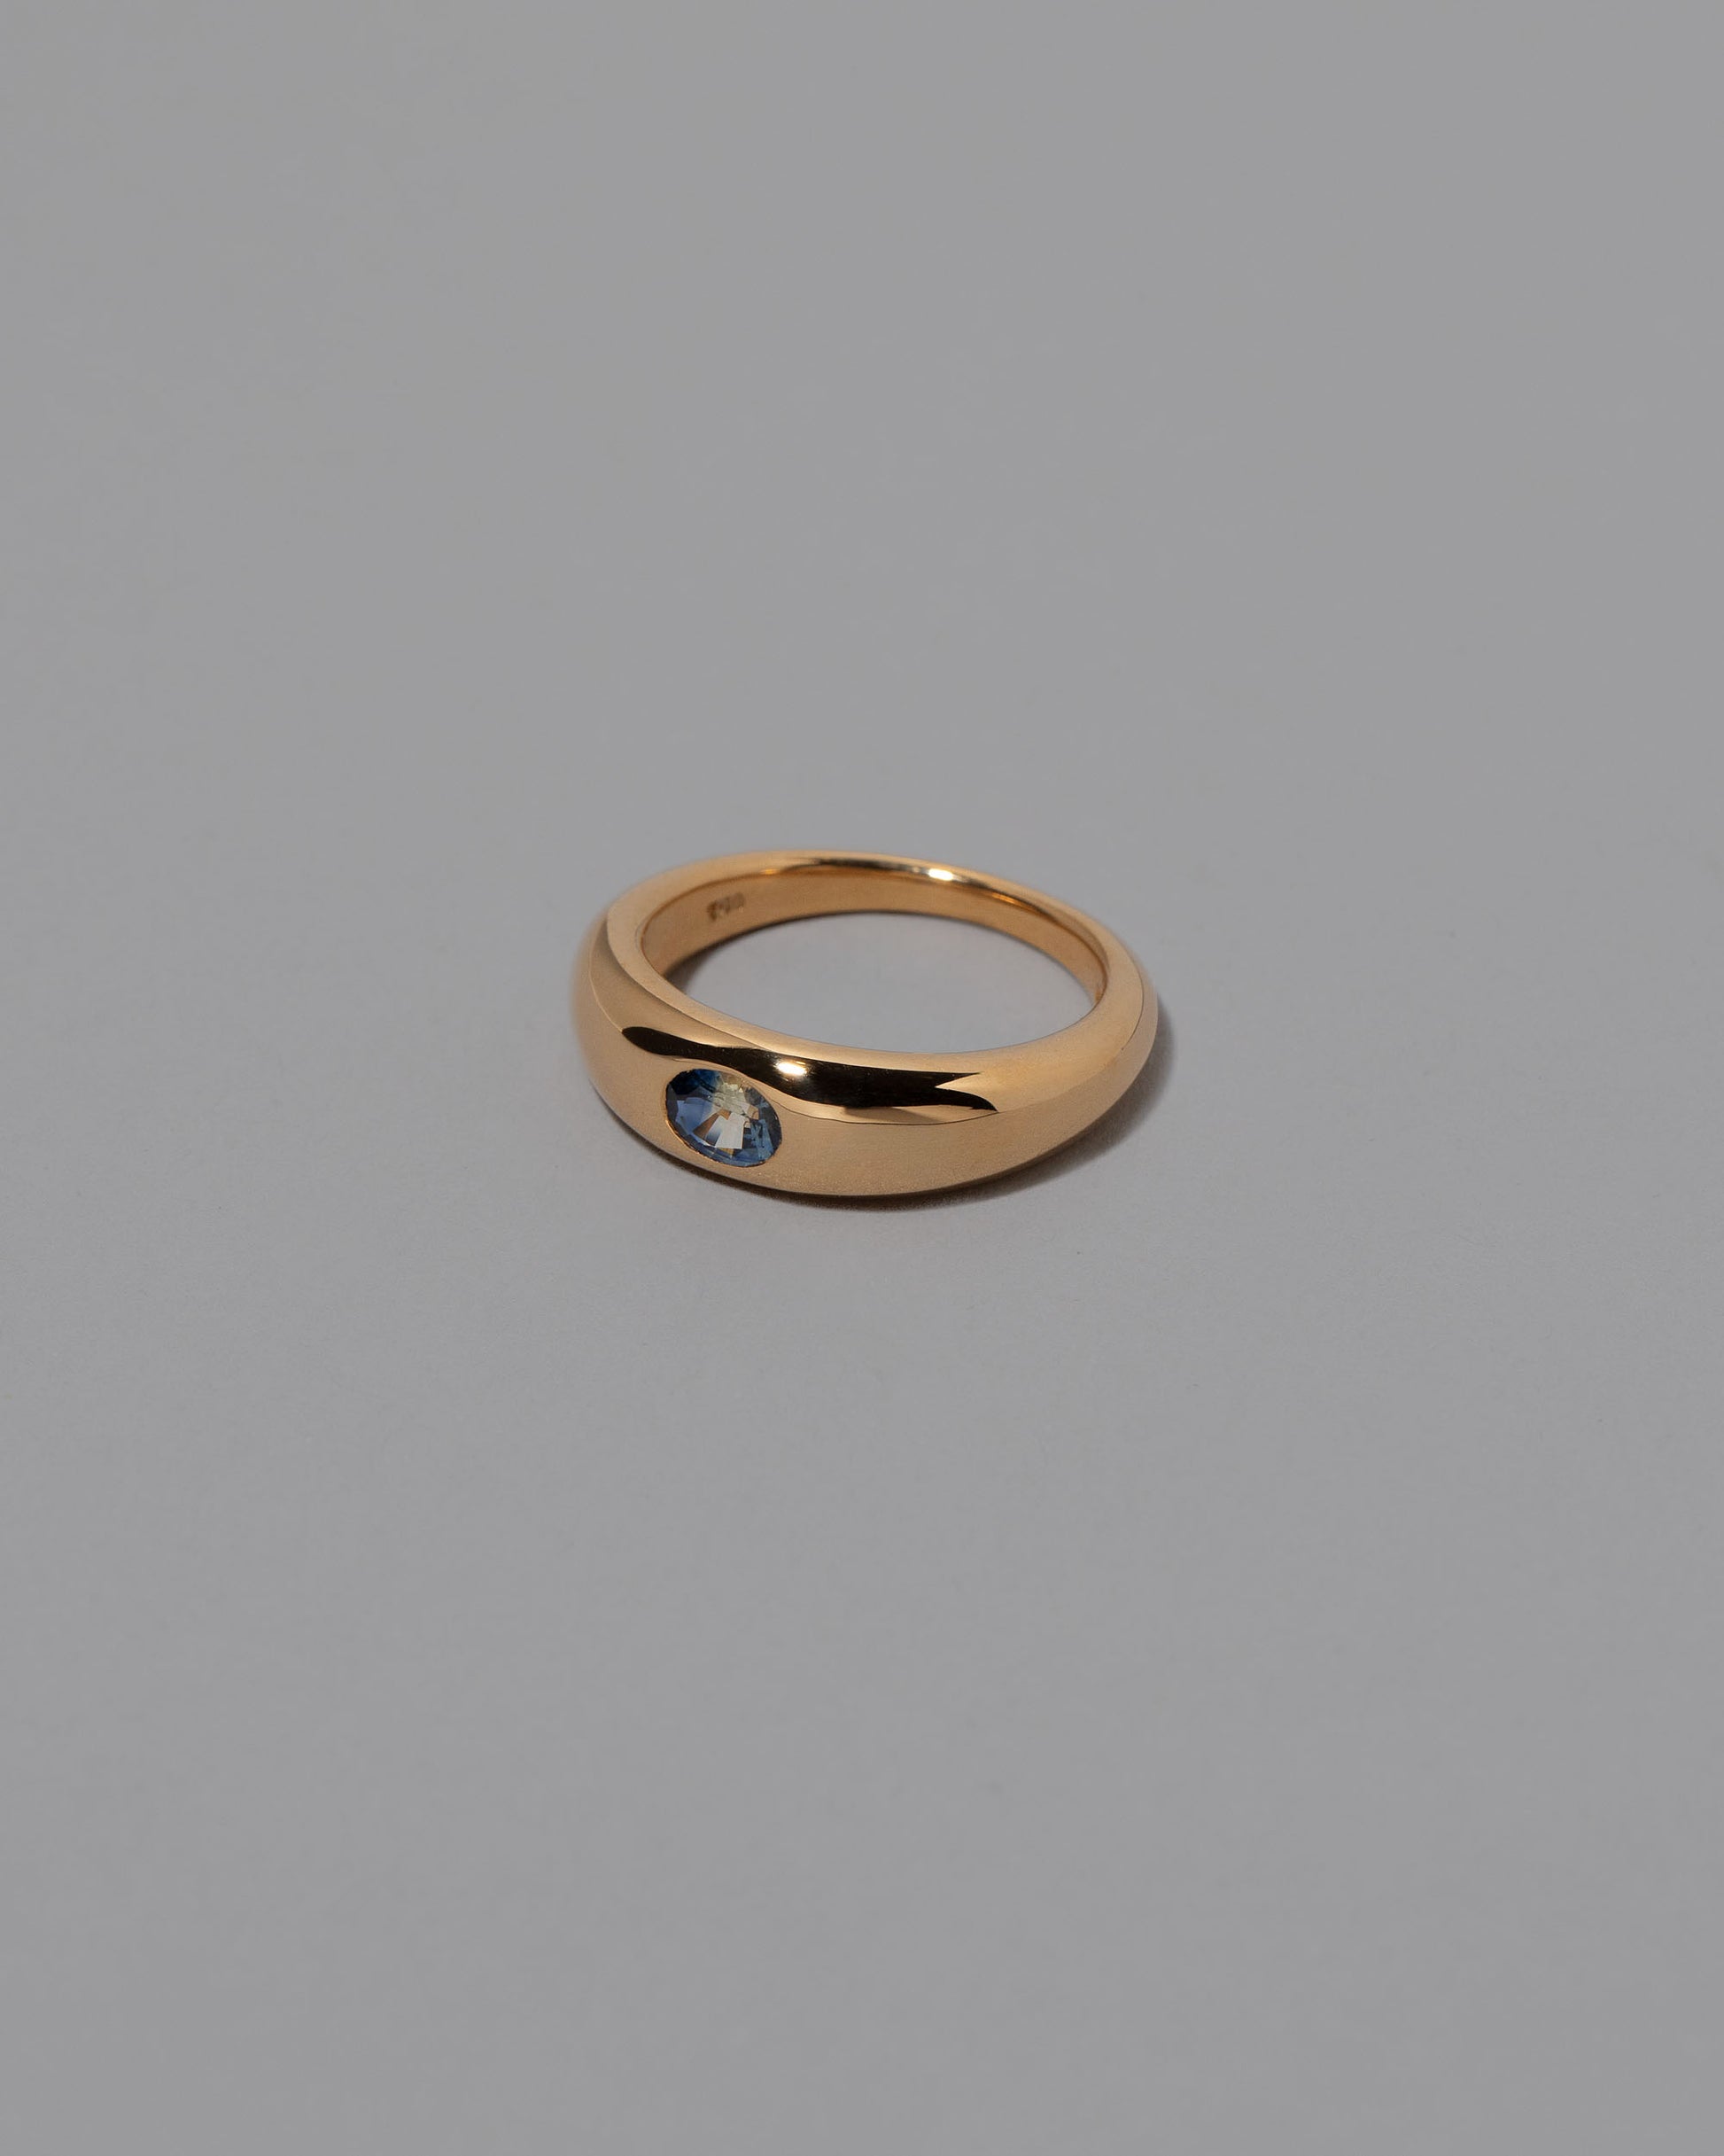 View from the side of the Bicolor Sapphire Venus Ring on grey color background.